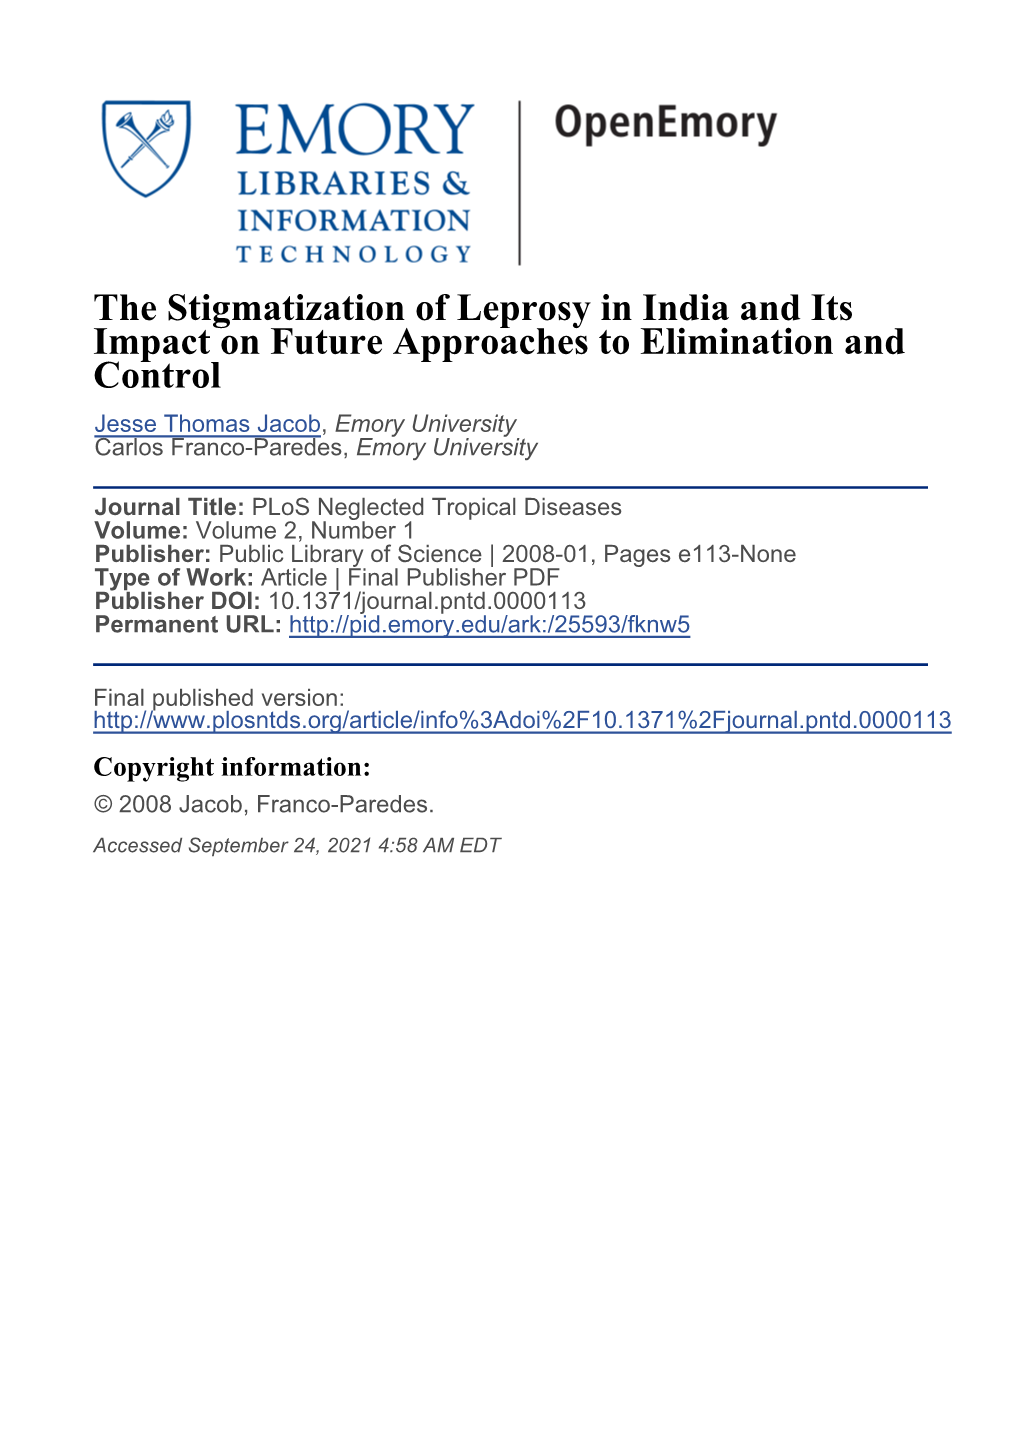 The Stigmatization of Leprosy in India and Its Impact On